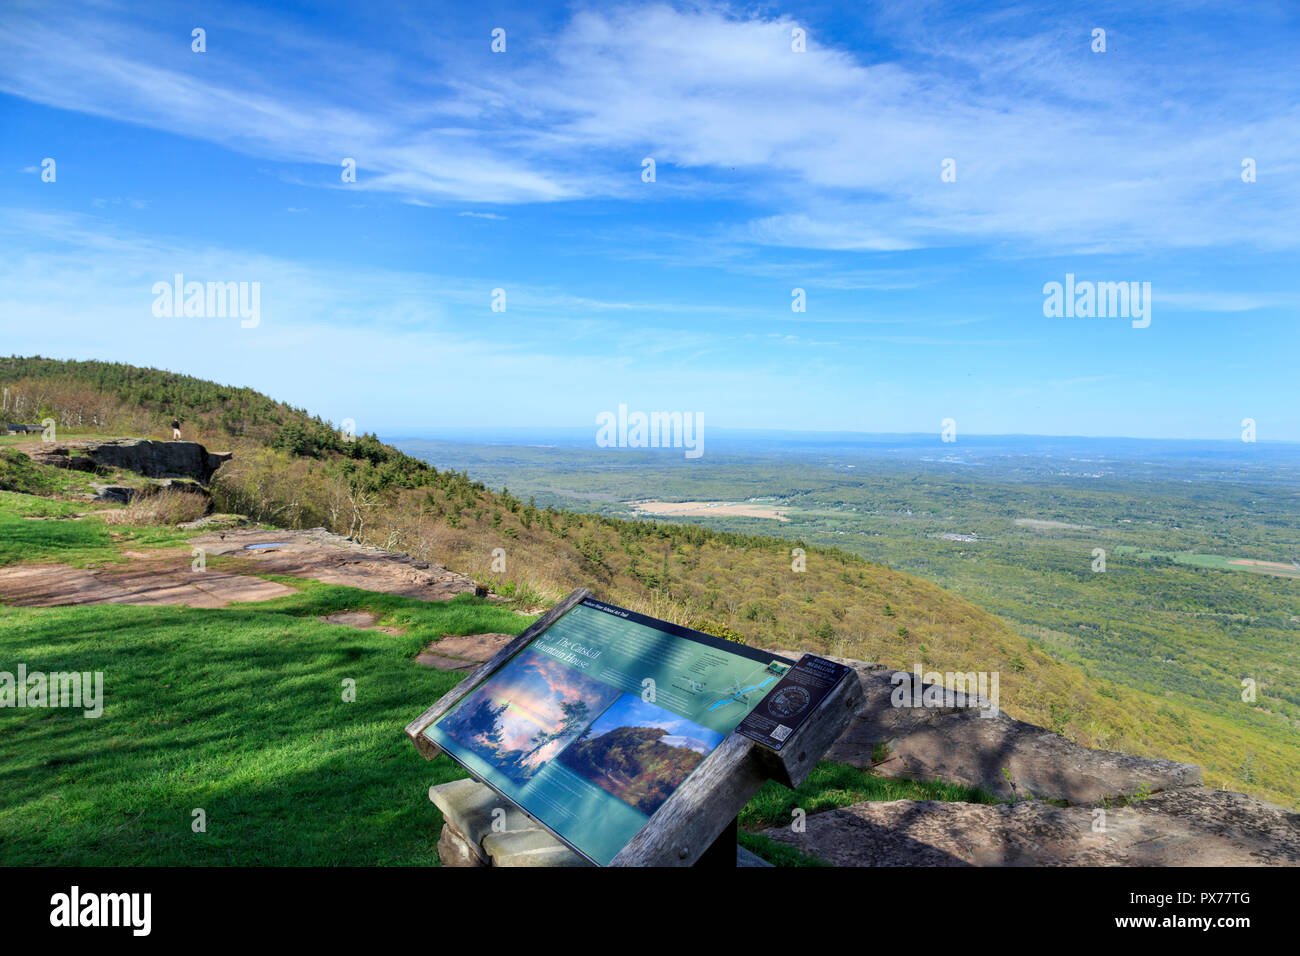 Signage at Site of Historic Catskill Mountain House with View over New York Landscape, near Tannersville, New York, USA Stock Photo